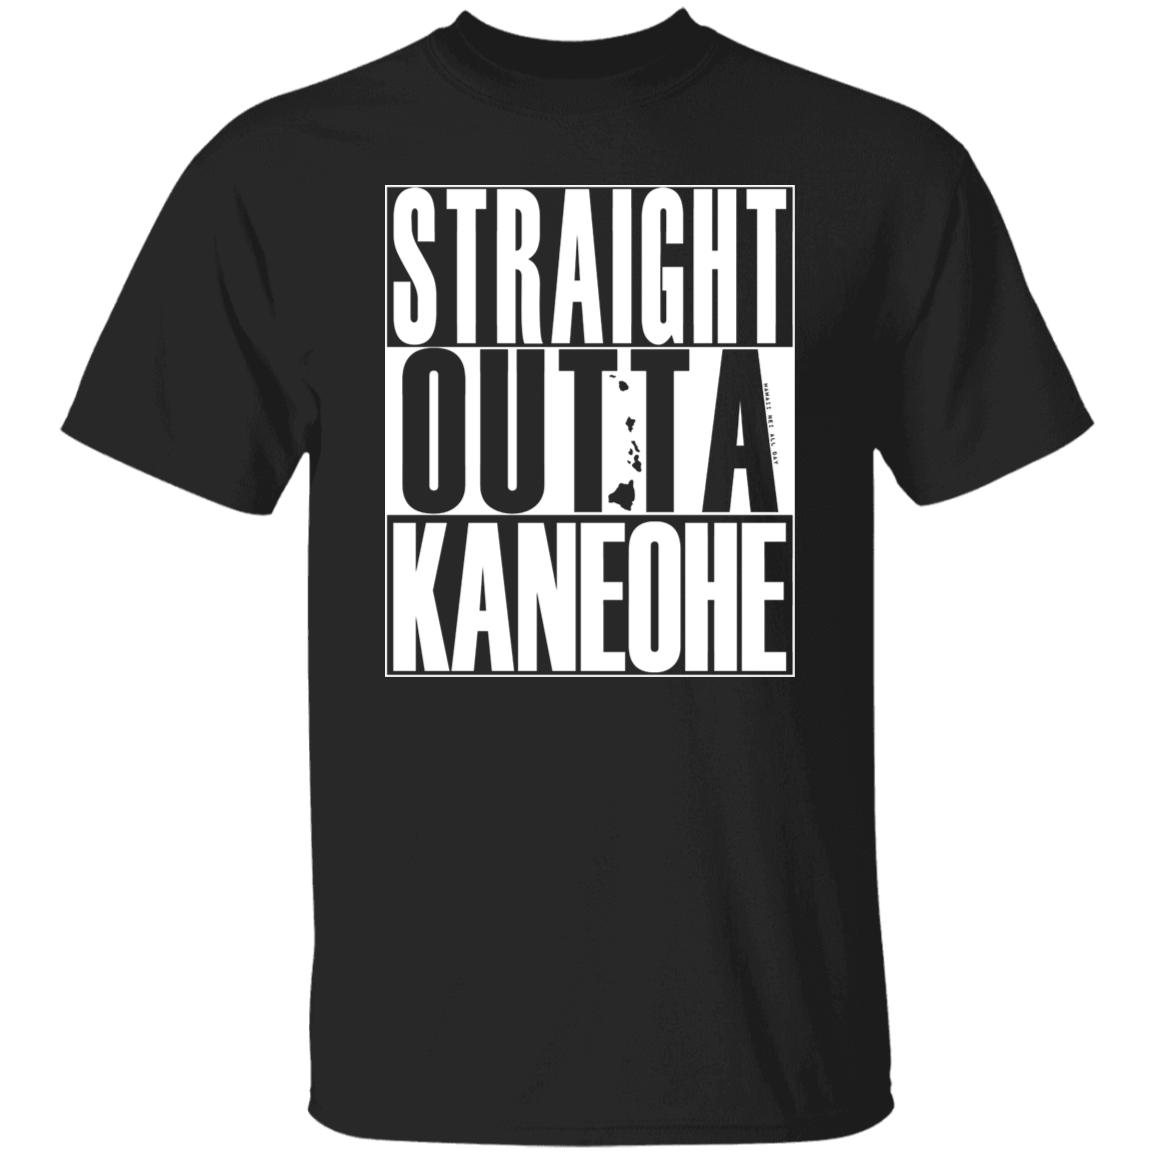 Straight Outta Kaneohe (white ink) T-Shirt